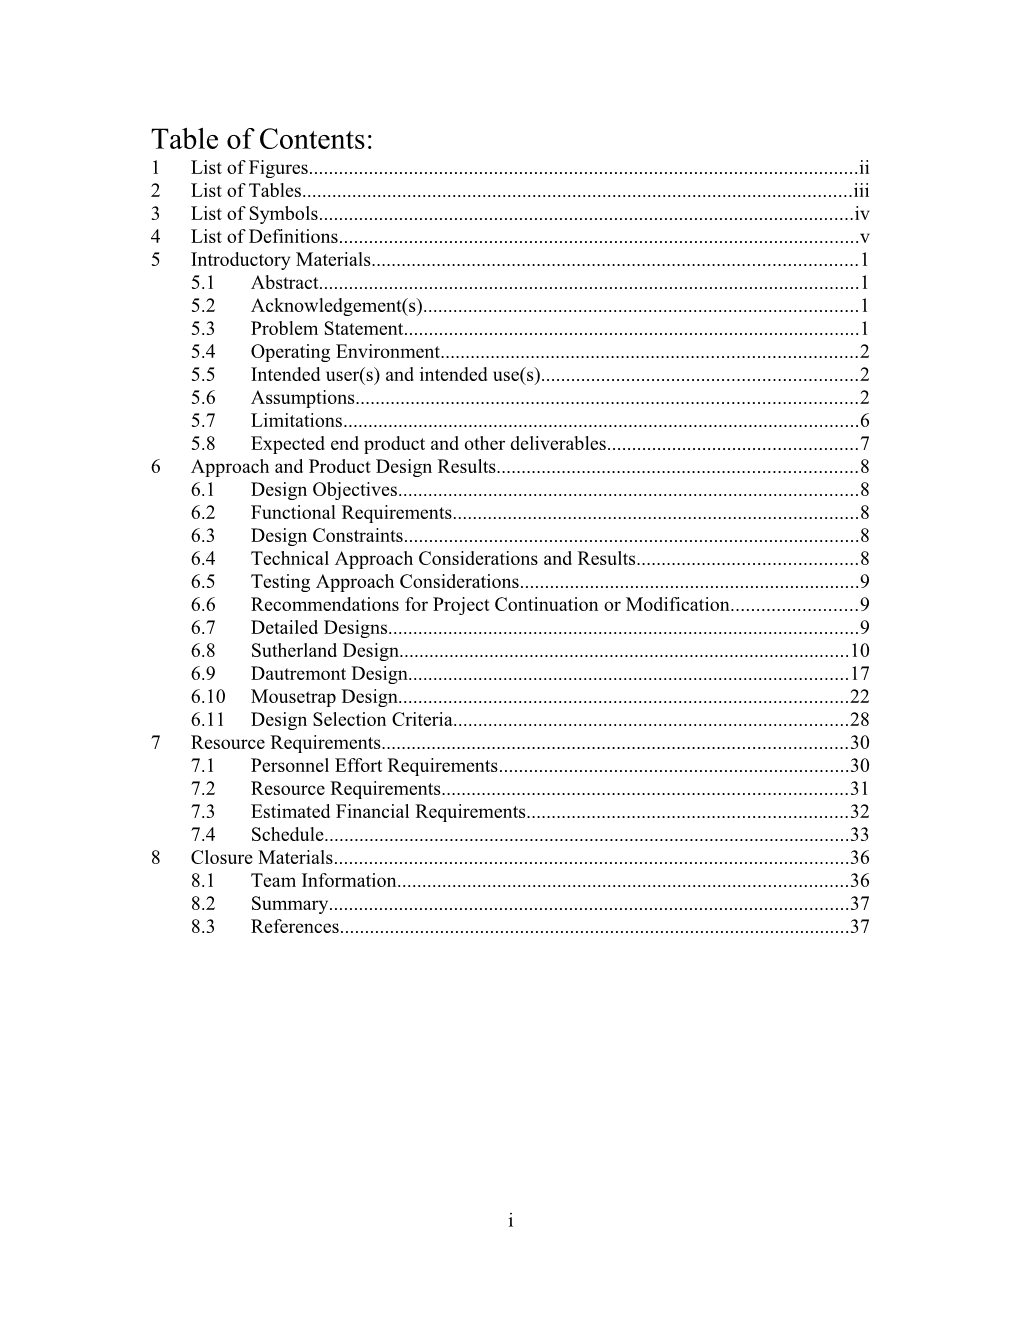 Table of Contents s403